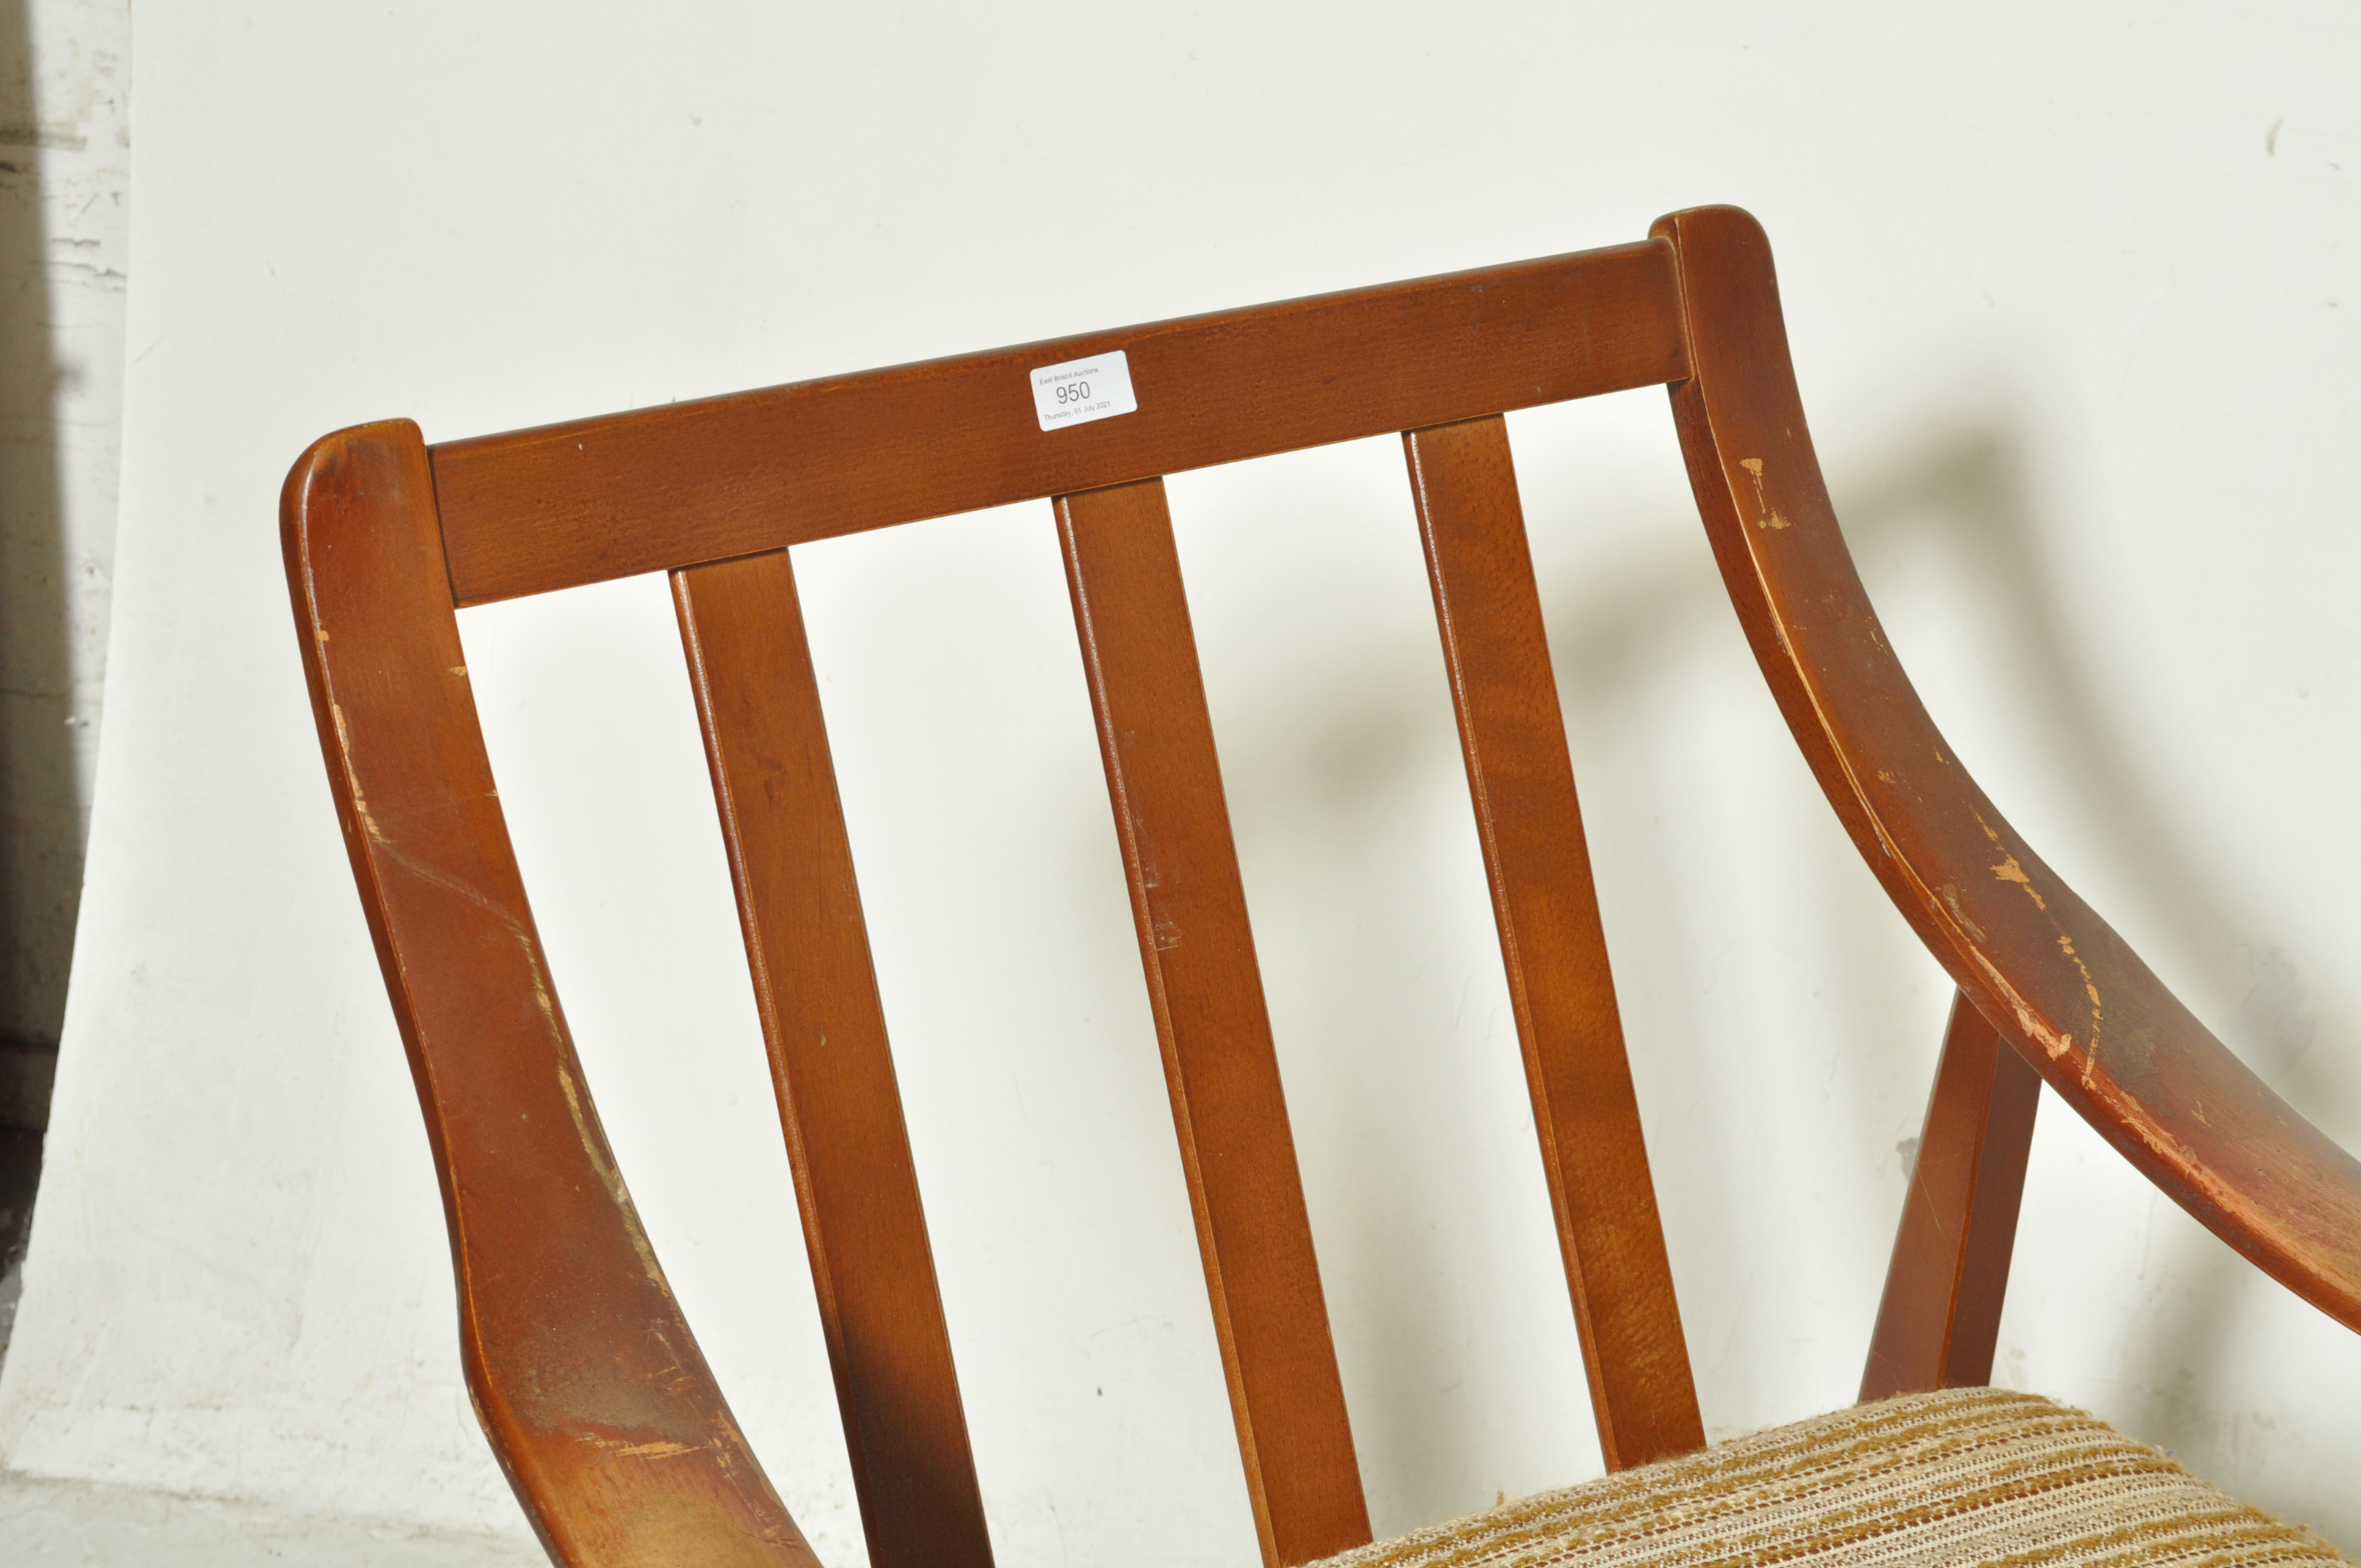 MID 20TH CENTURY DANISH INSPIRED SHOW WOOD EASY CHAIR - Image 3 of 5